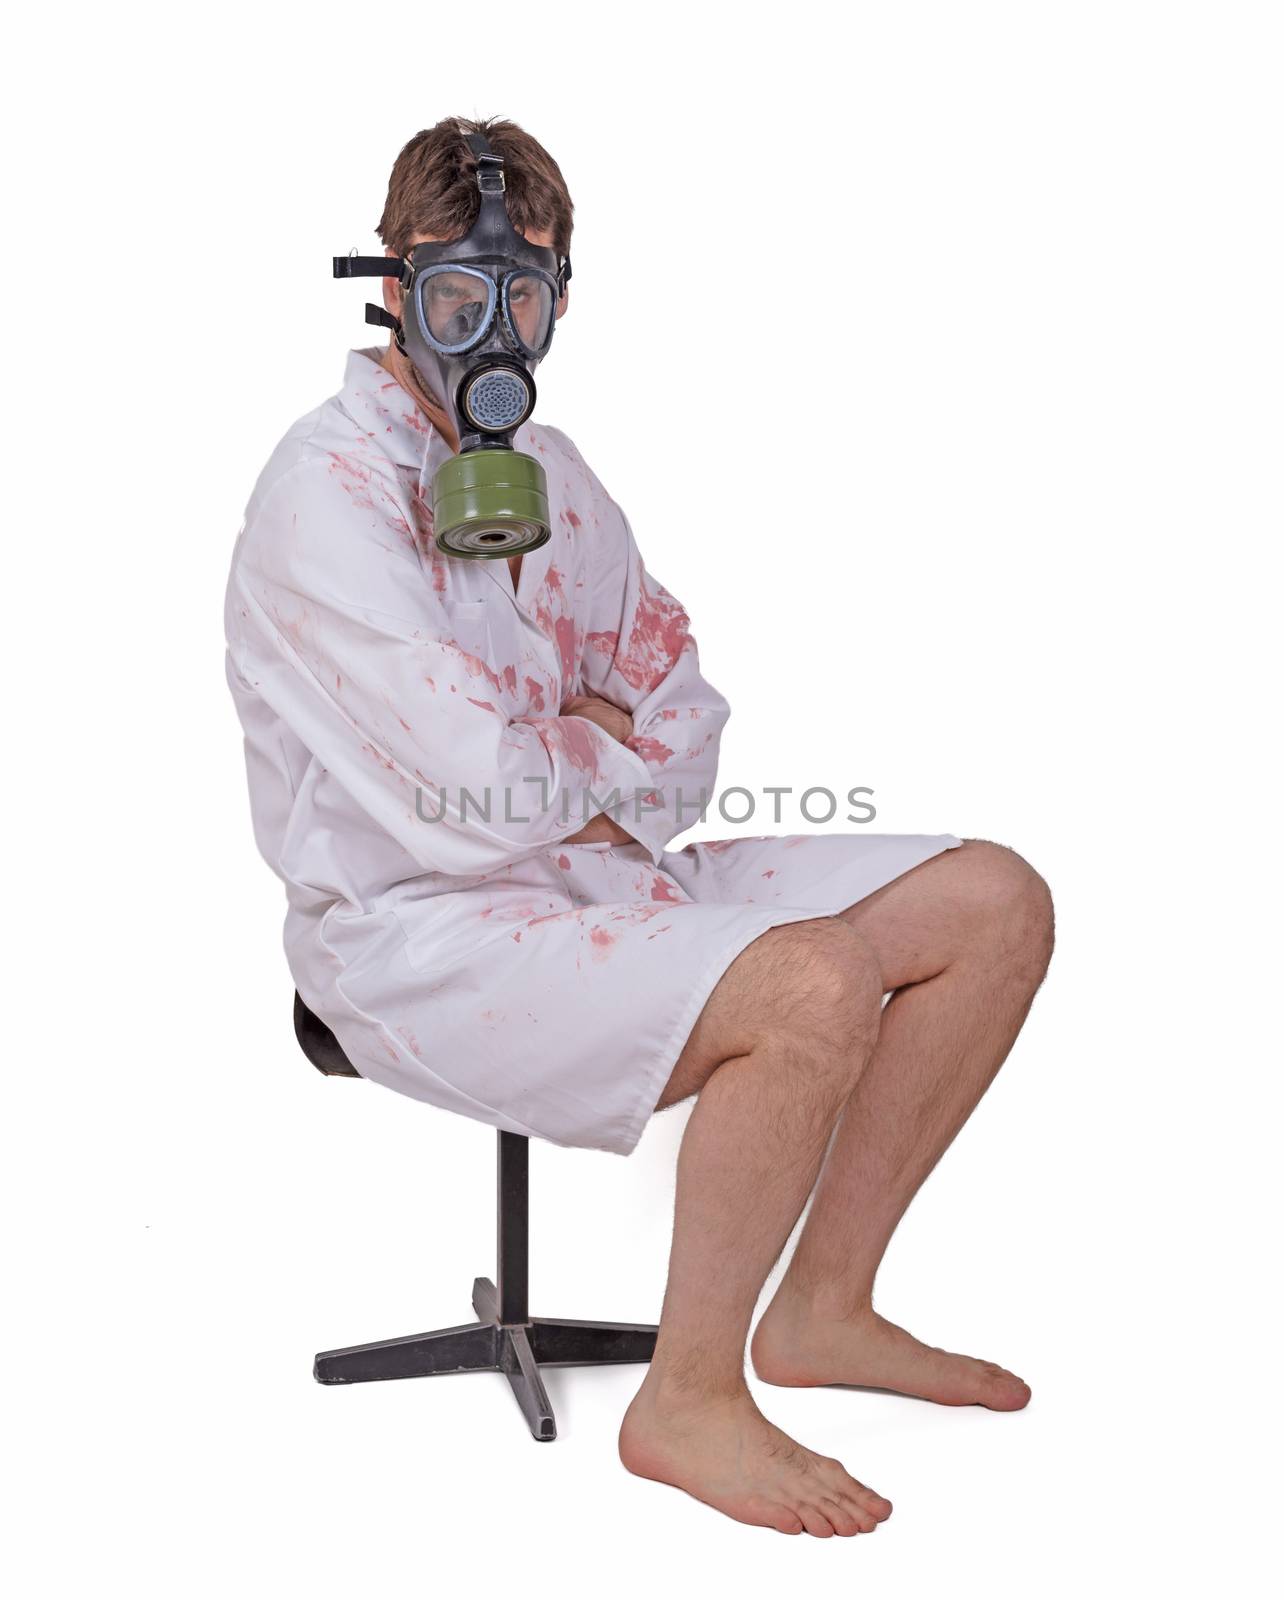 Man wearing gas mask and bloody doctors coat sitting on small ch by michaklootwijk